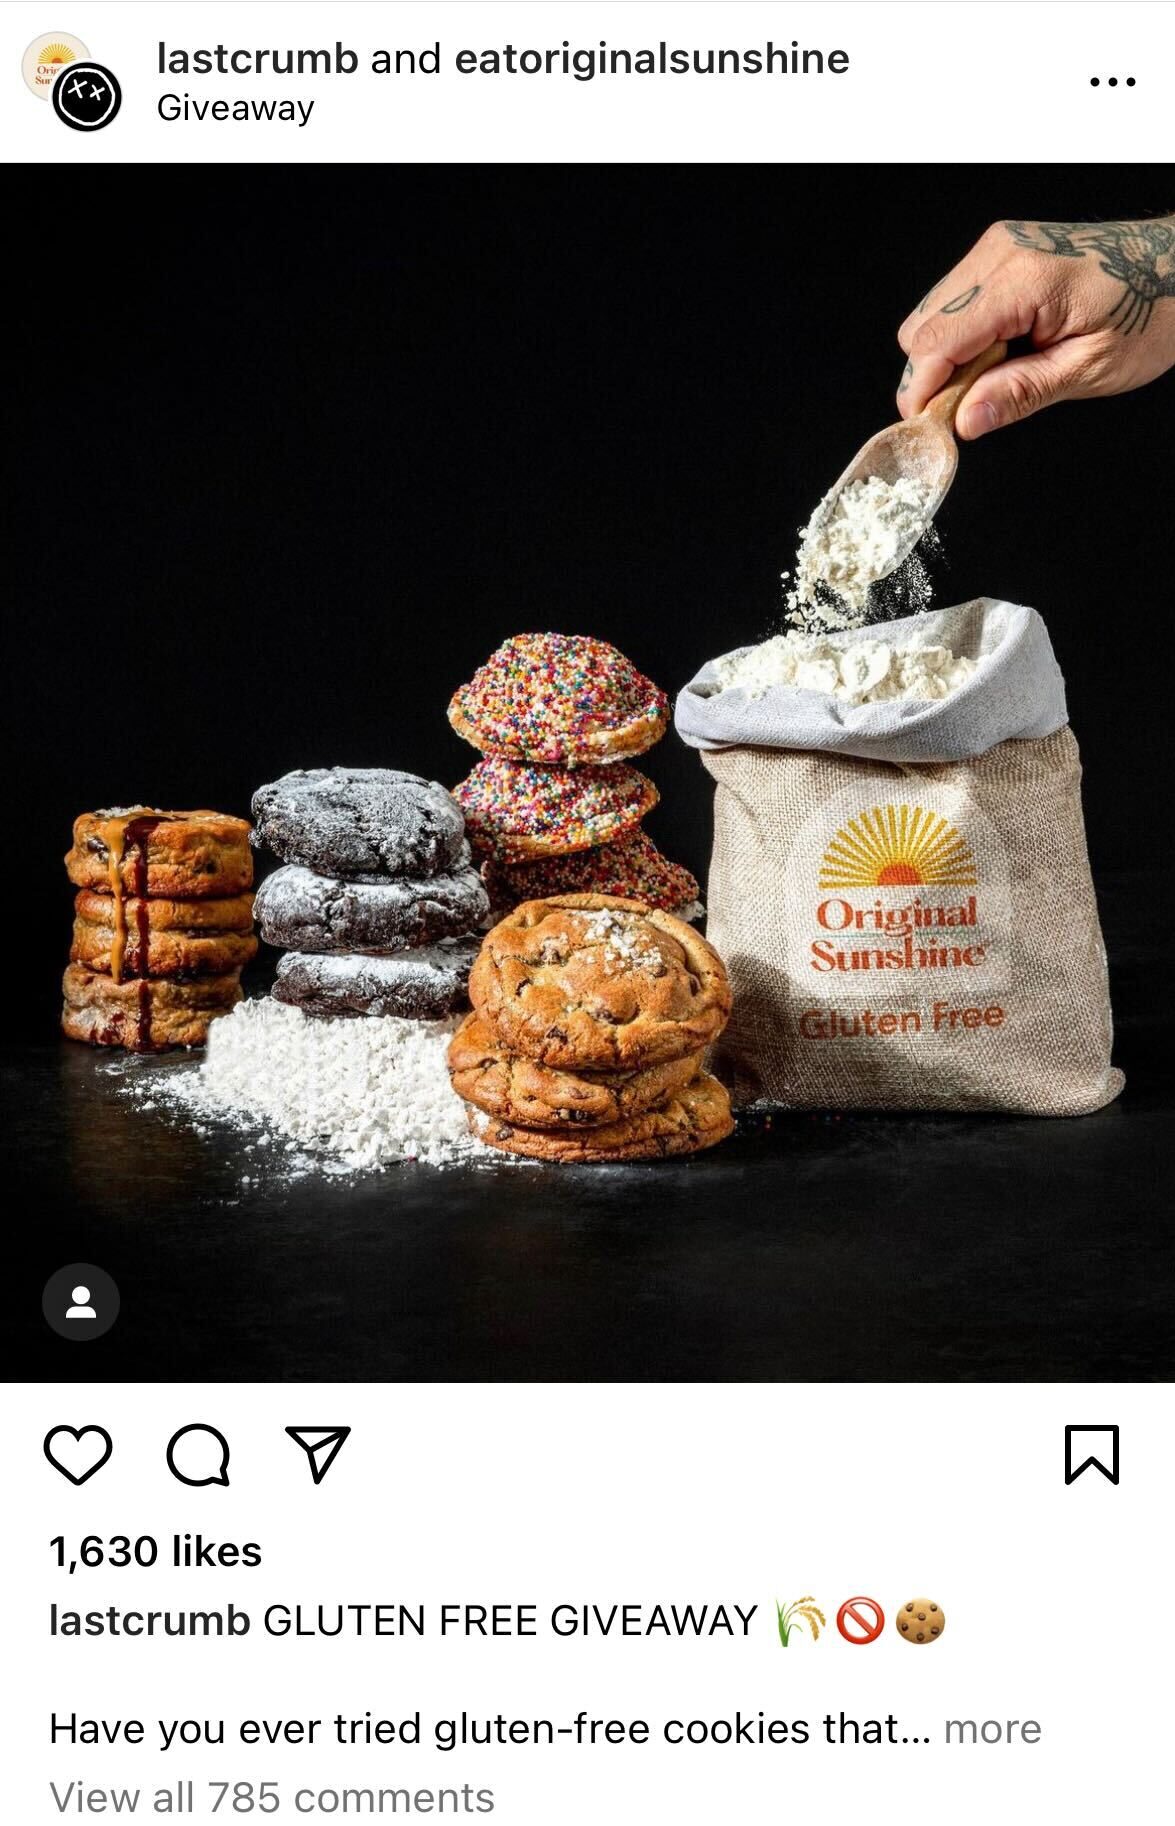 a screen capture from Last Crumb's Instagram page showing a gluten free giveaway promotion